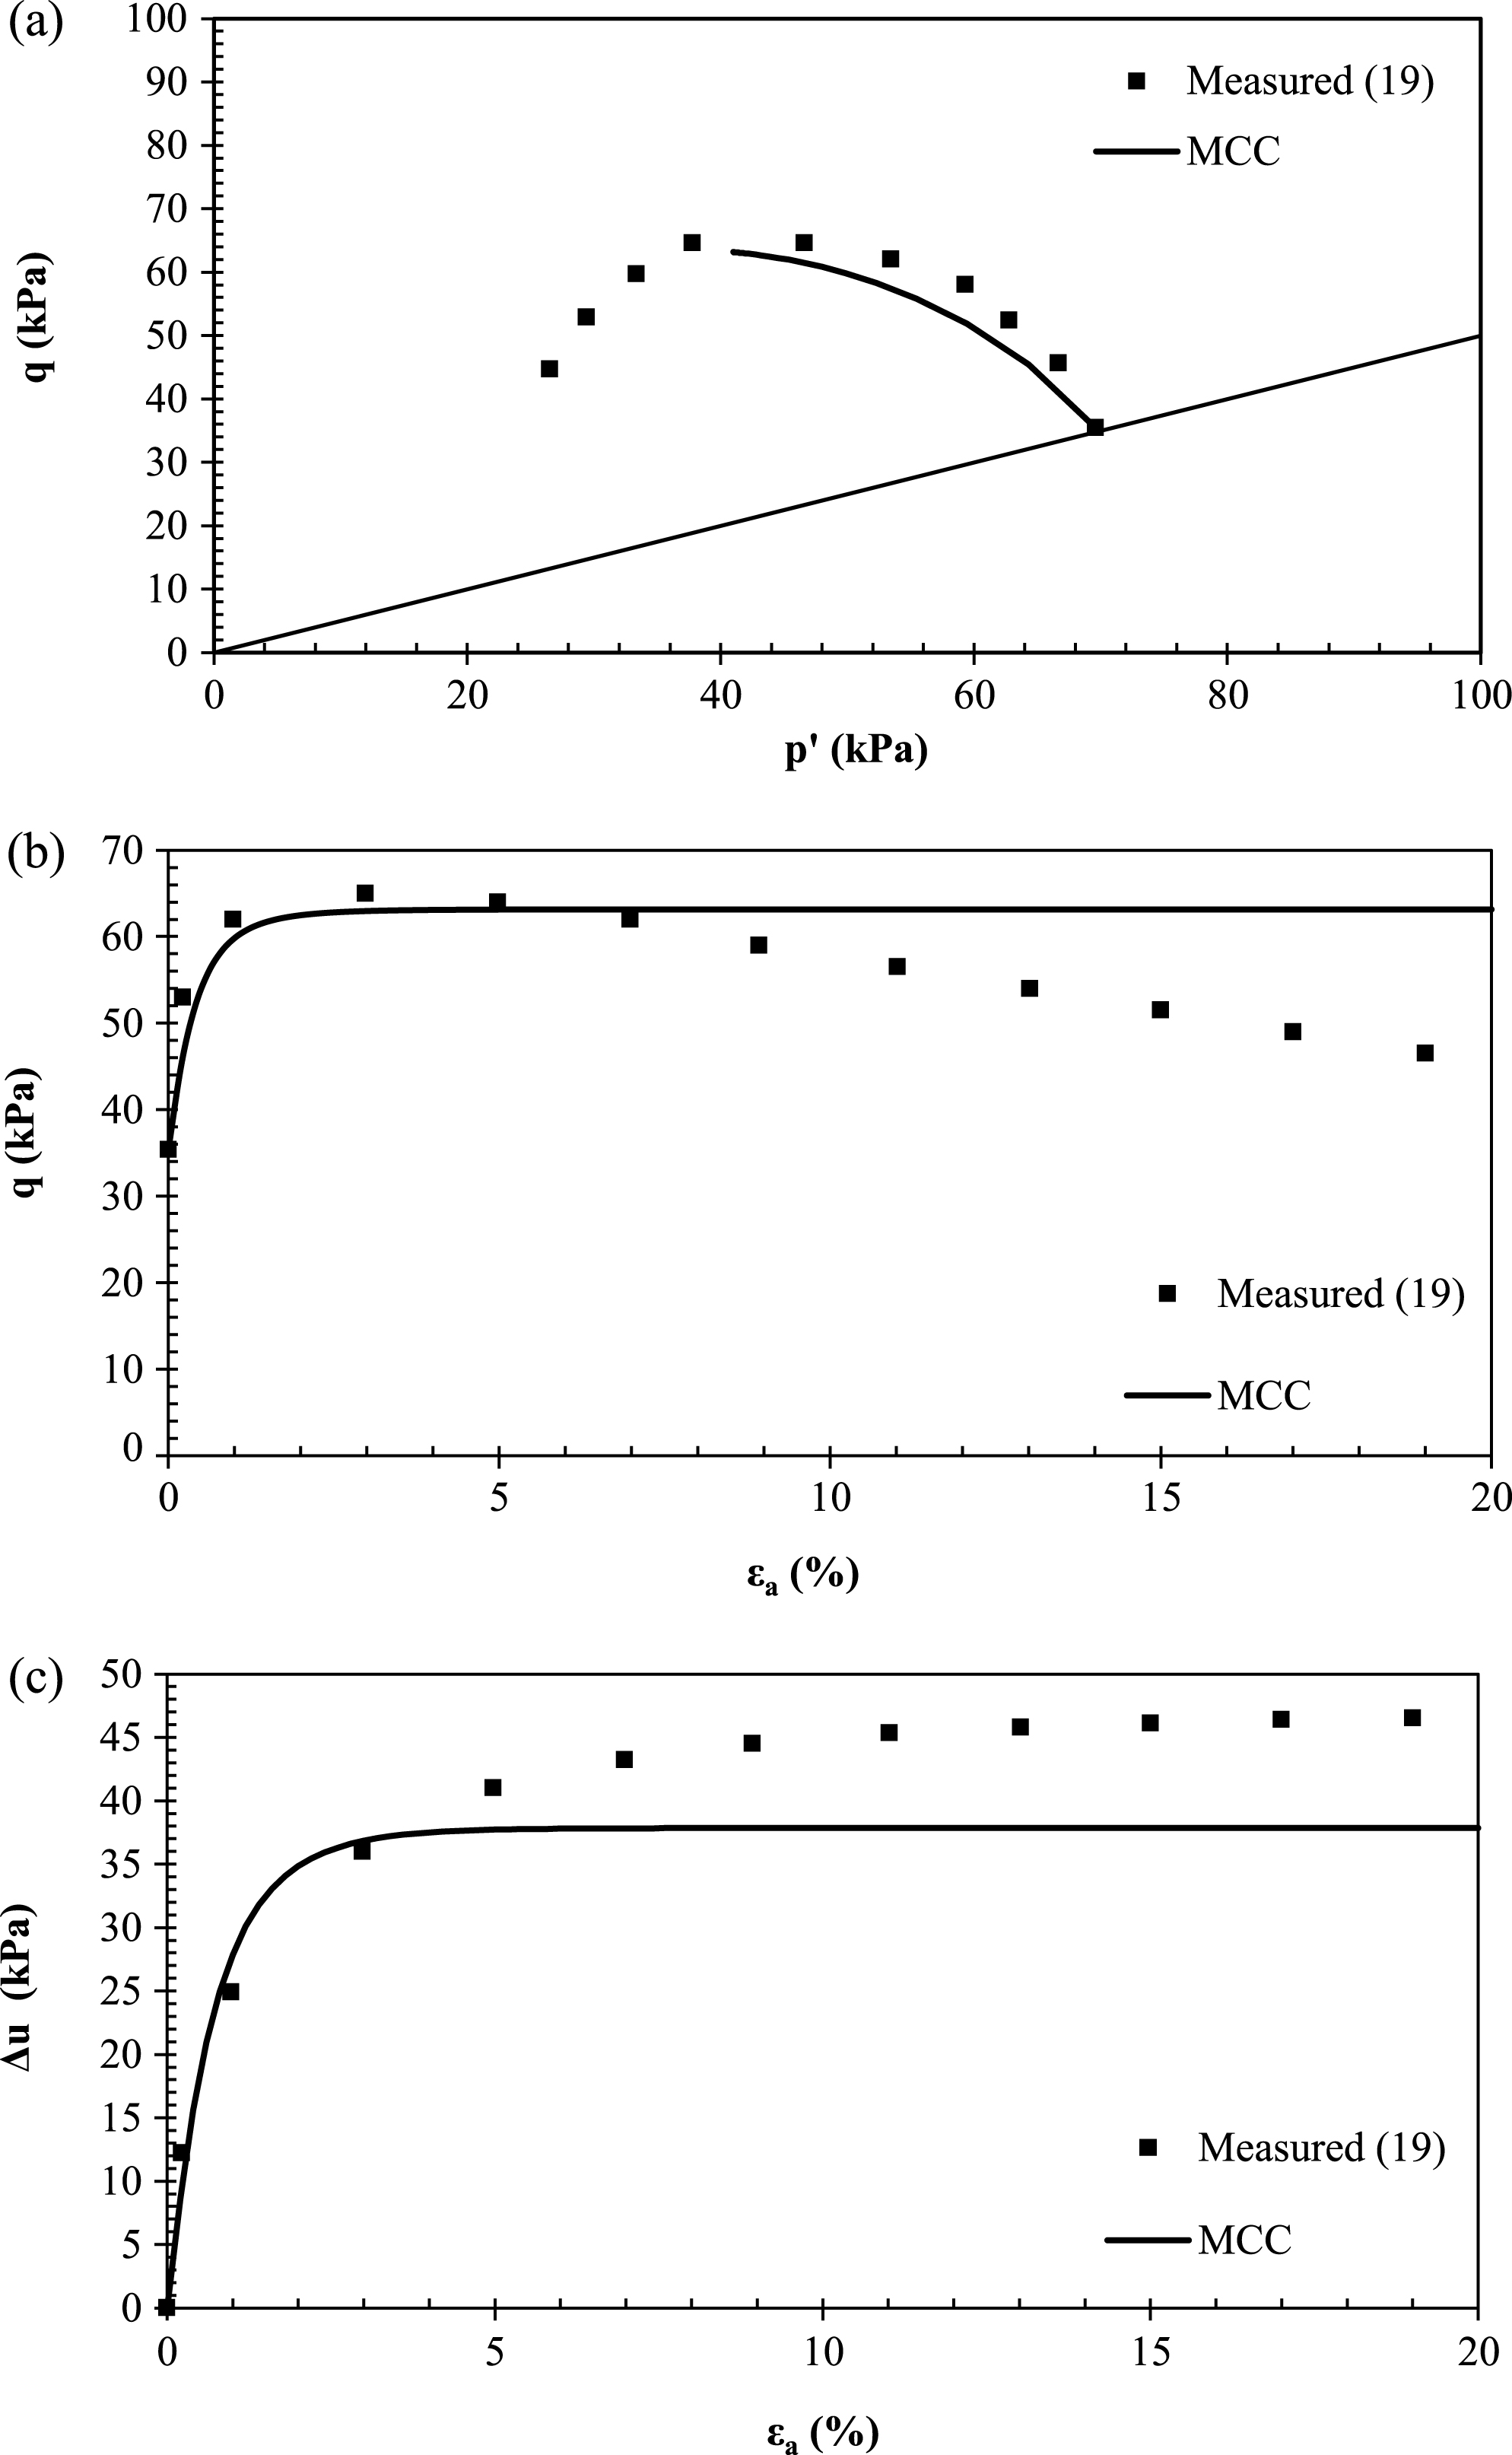 MCC calibrated predictions vs. measured (a) stress paths, (b) stress-strain curves and (c) pore pressures in triaxial compression for 12.4 m depth.